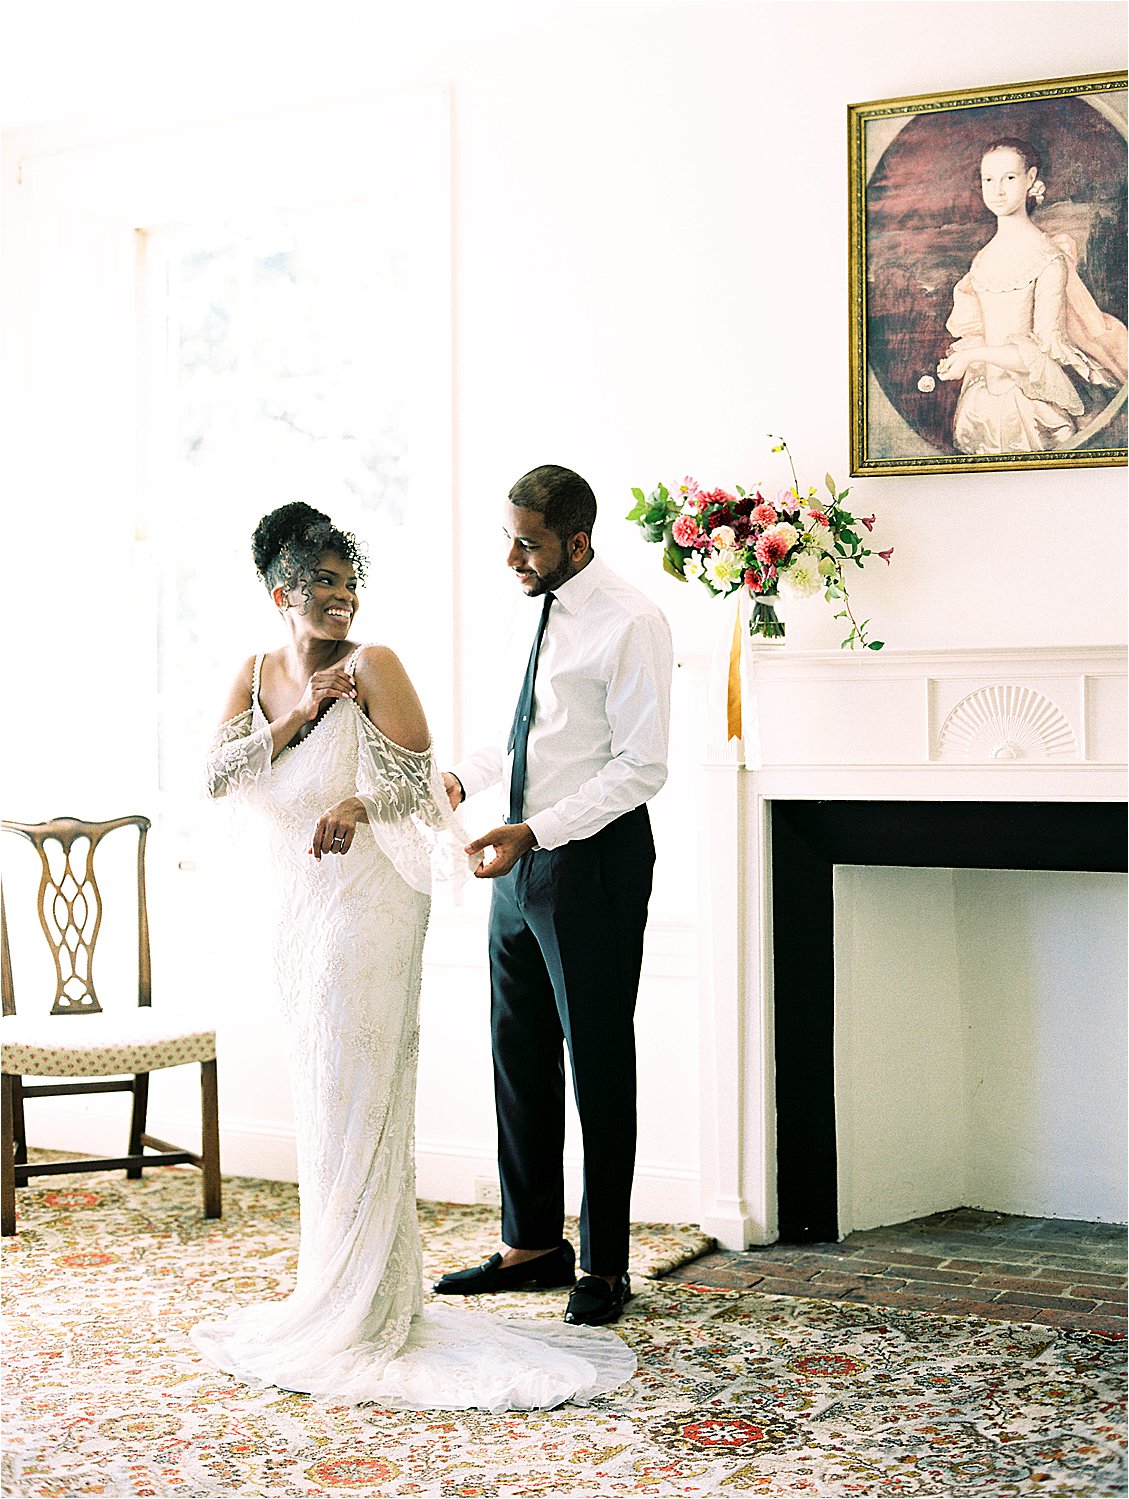 Bride and Groom get dressed together on wedding day photographed by DC Film Wedding Photographer, Renee Hollingshead